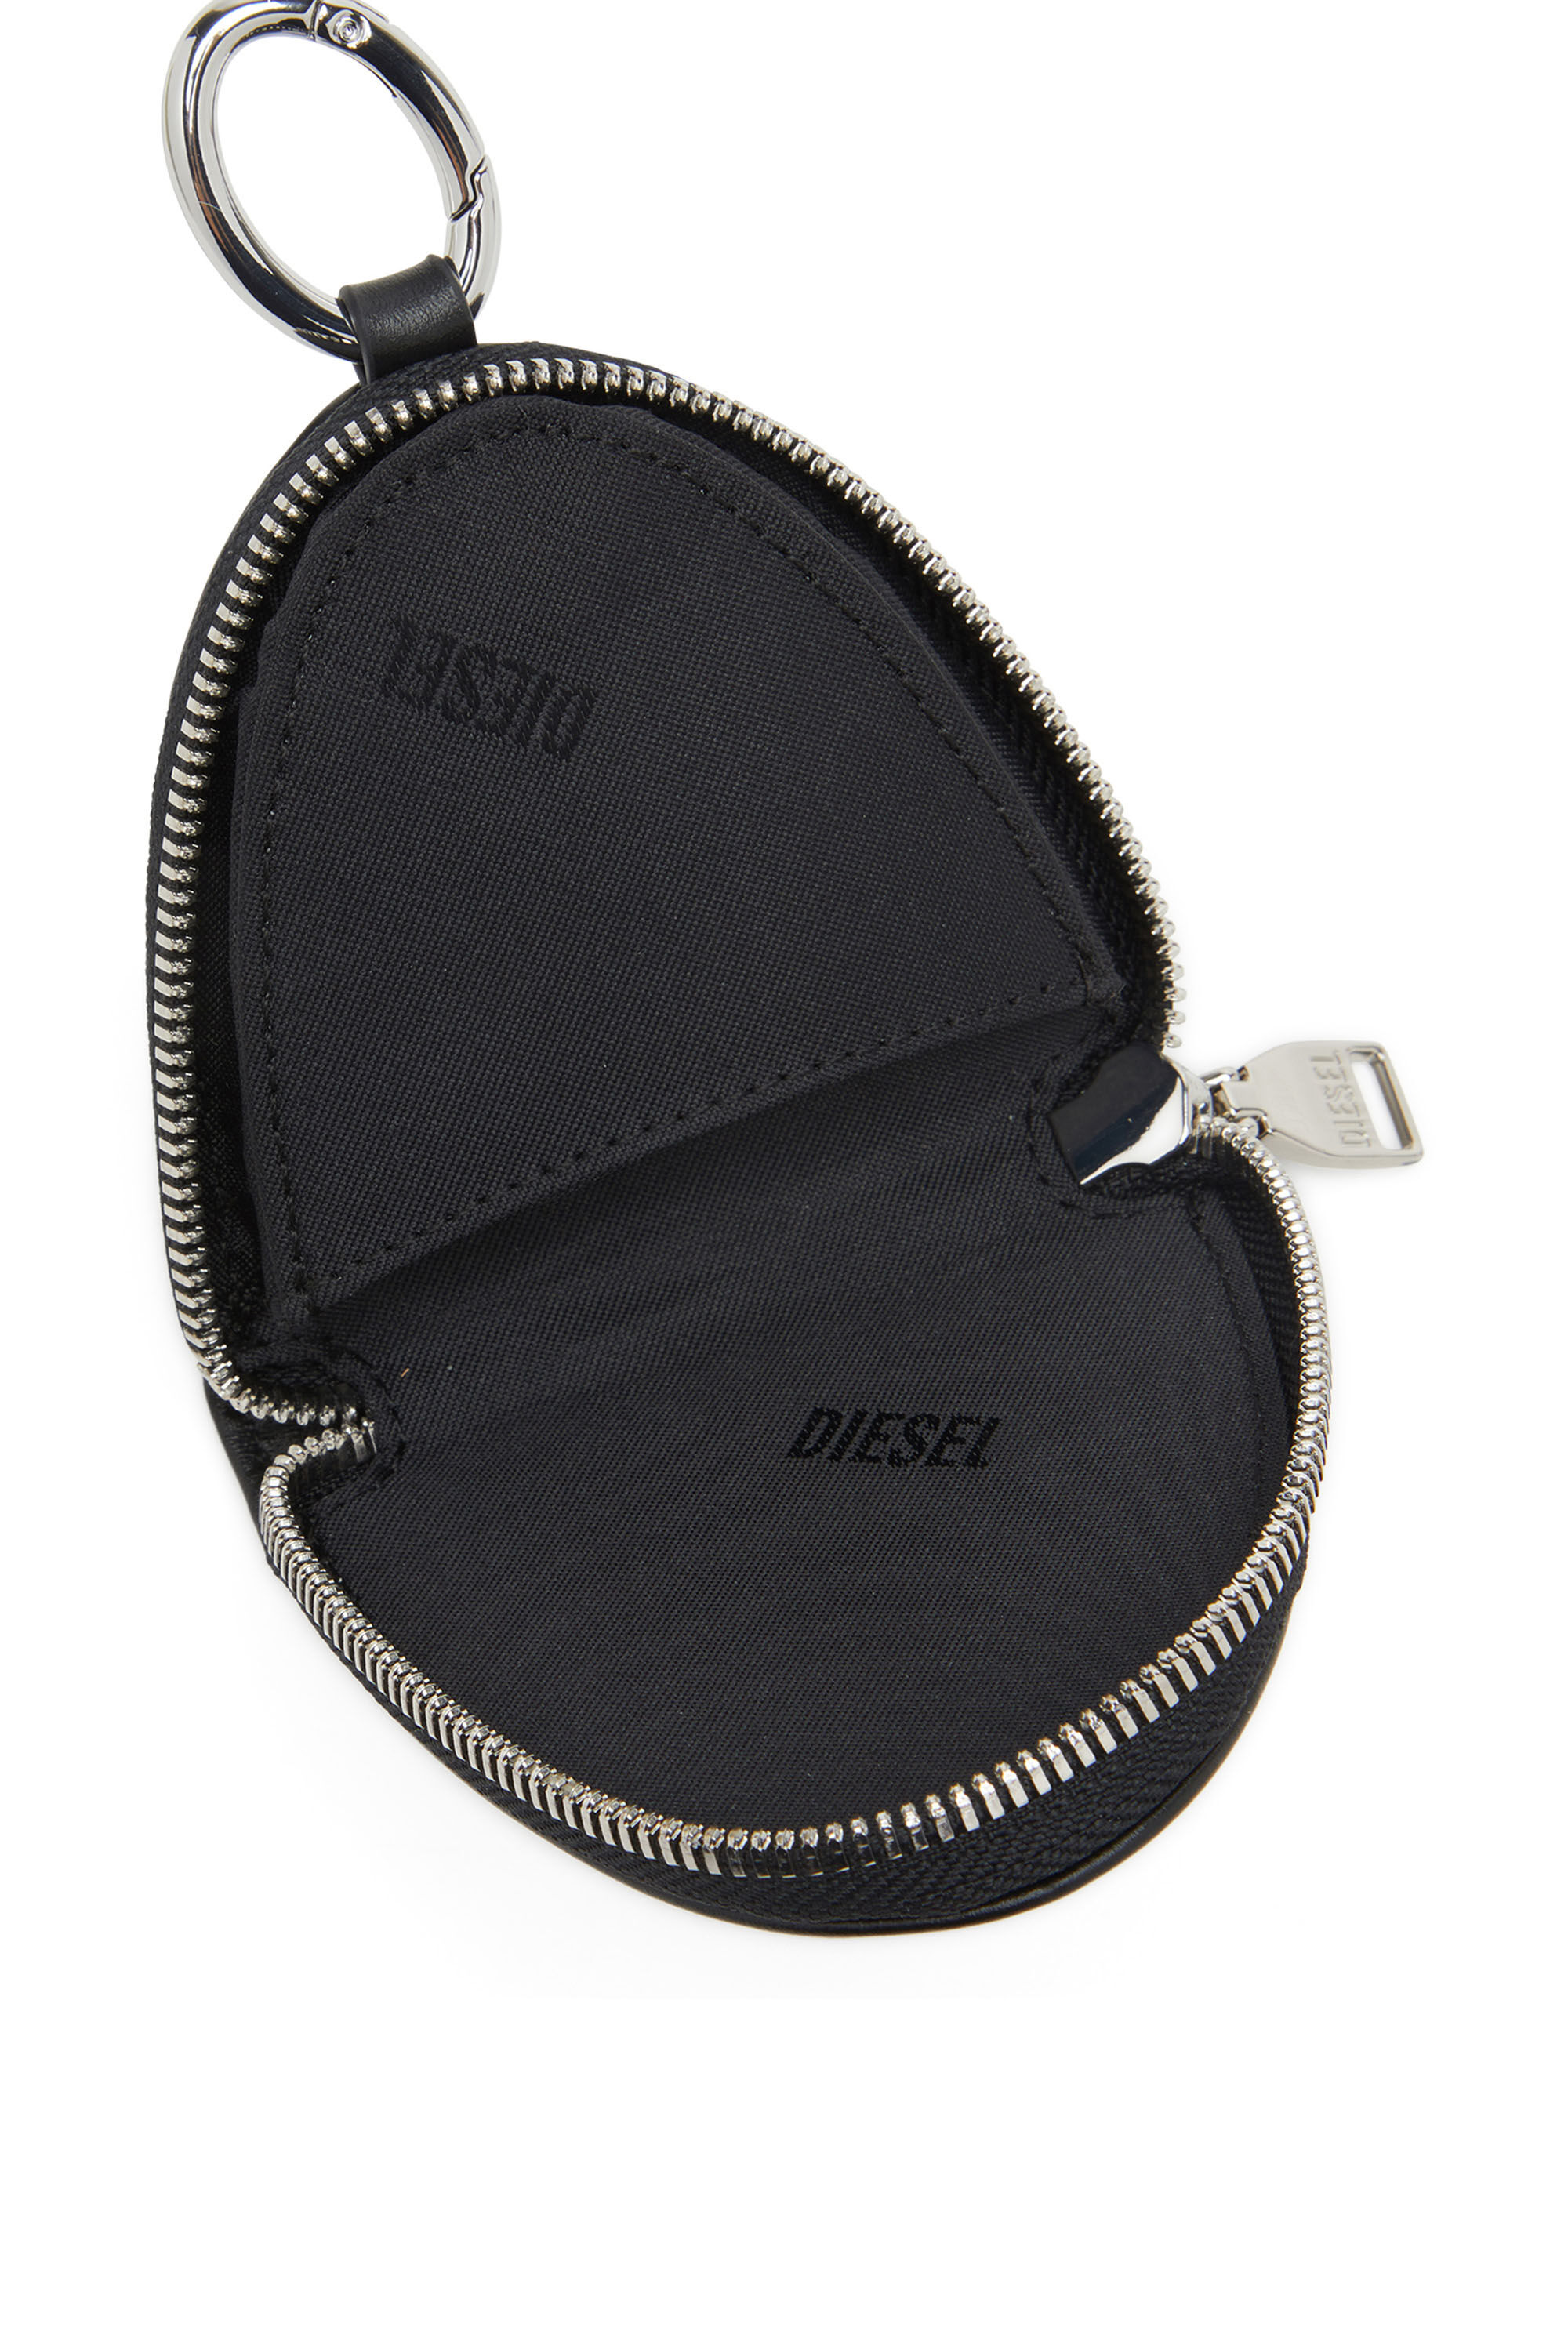 Women's Leather coin purse with embossed logo | Black | Diesel